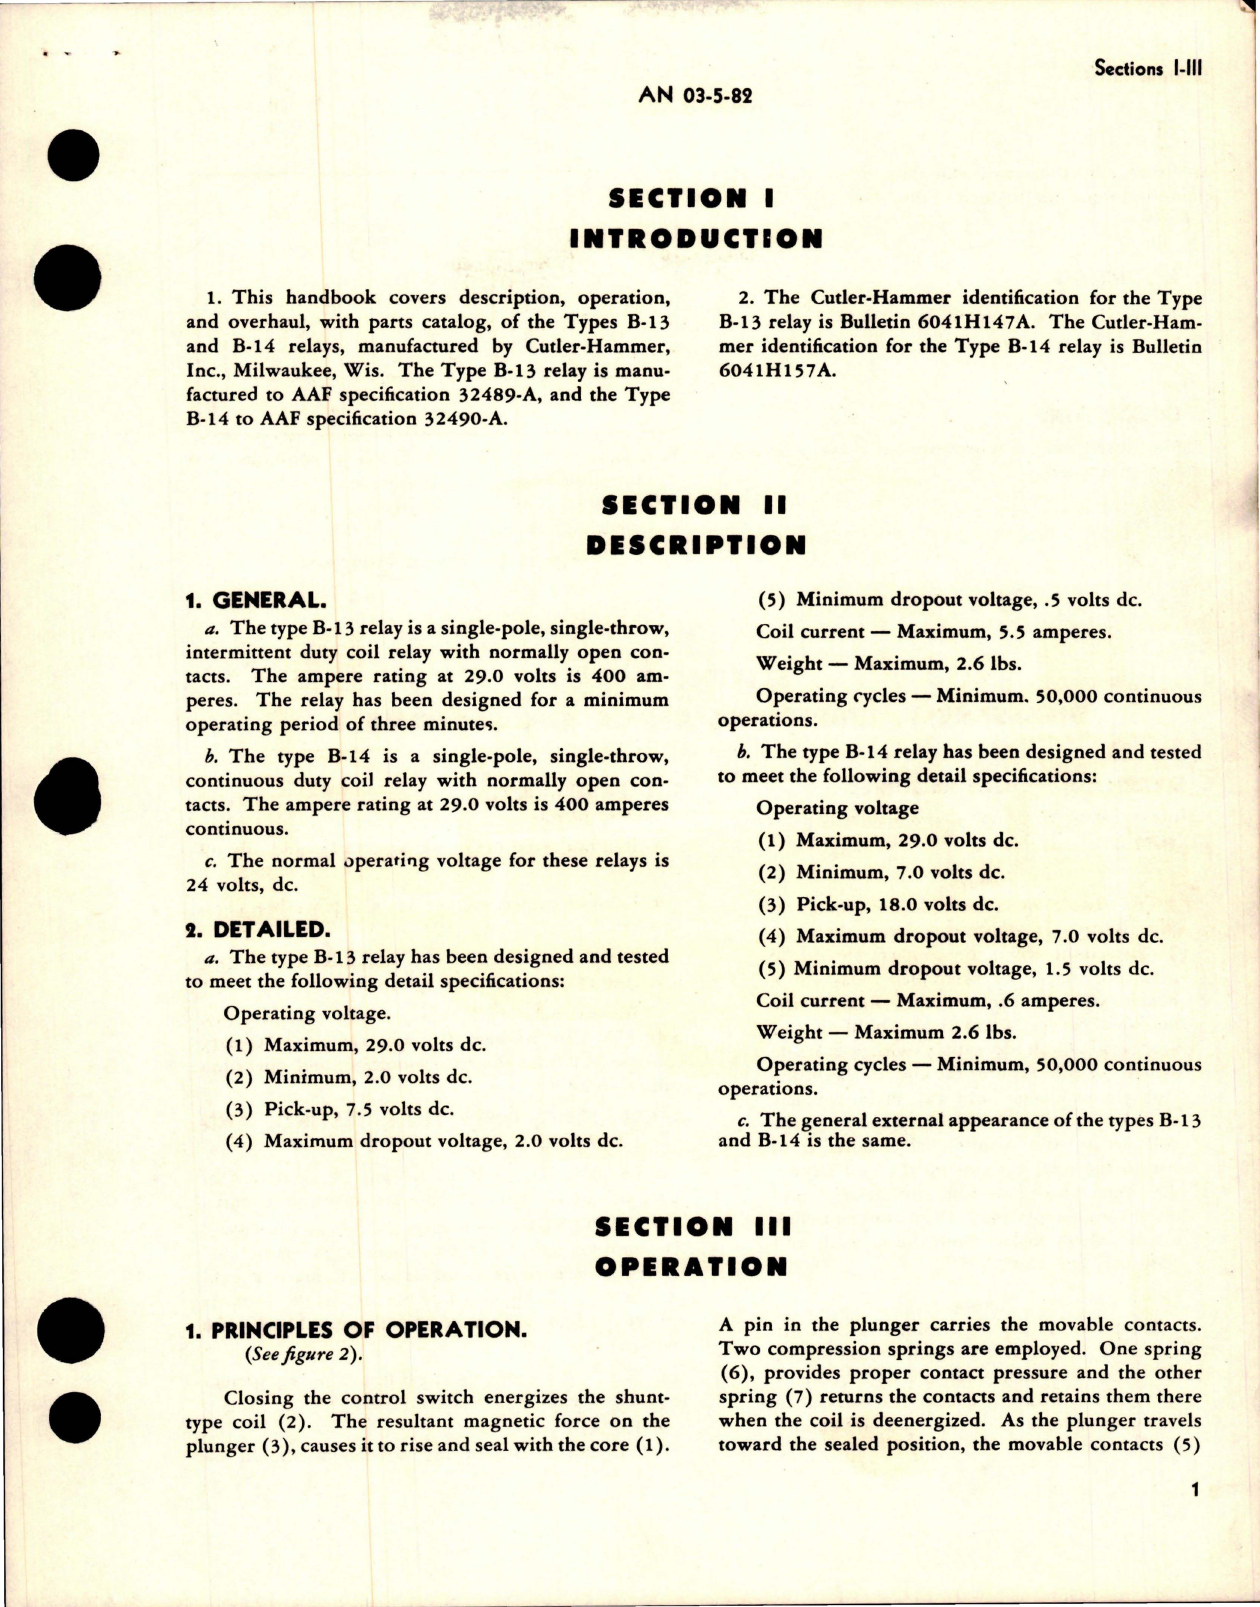 Sample page 5 from AirCorps Library document: Overhaul Instructions with Parts for Relays - Types B-13 and B-14 